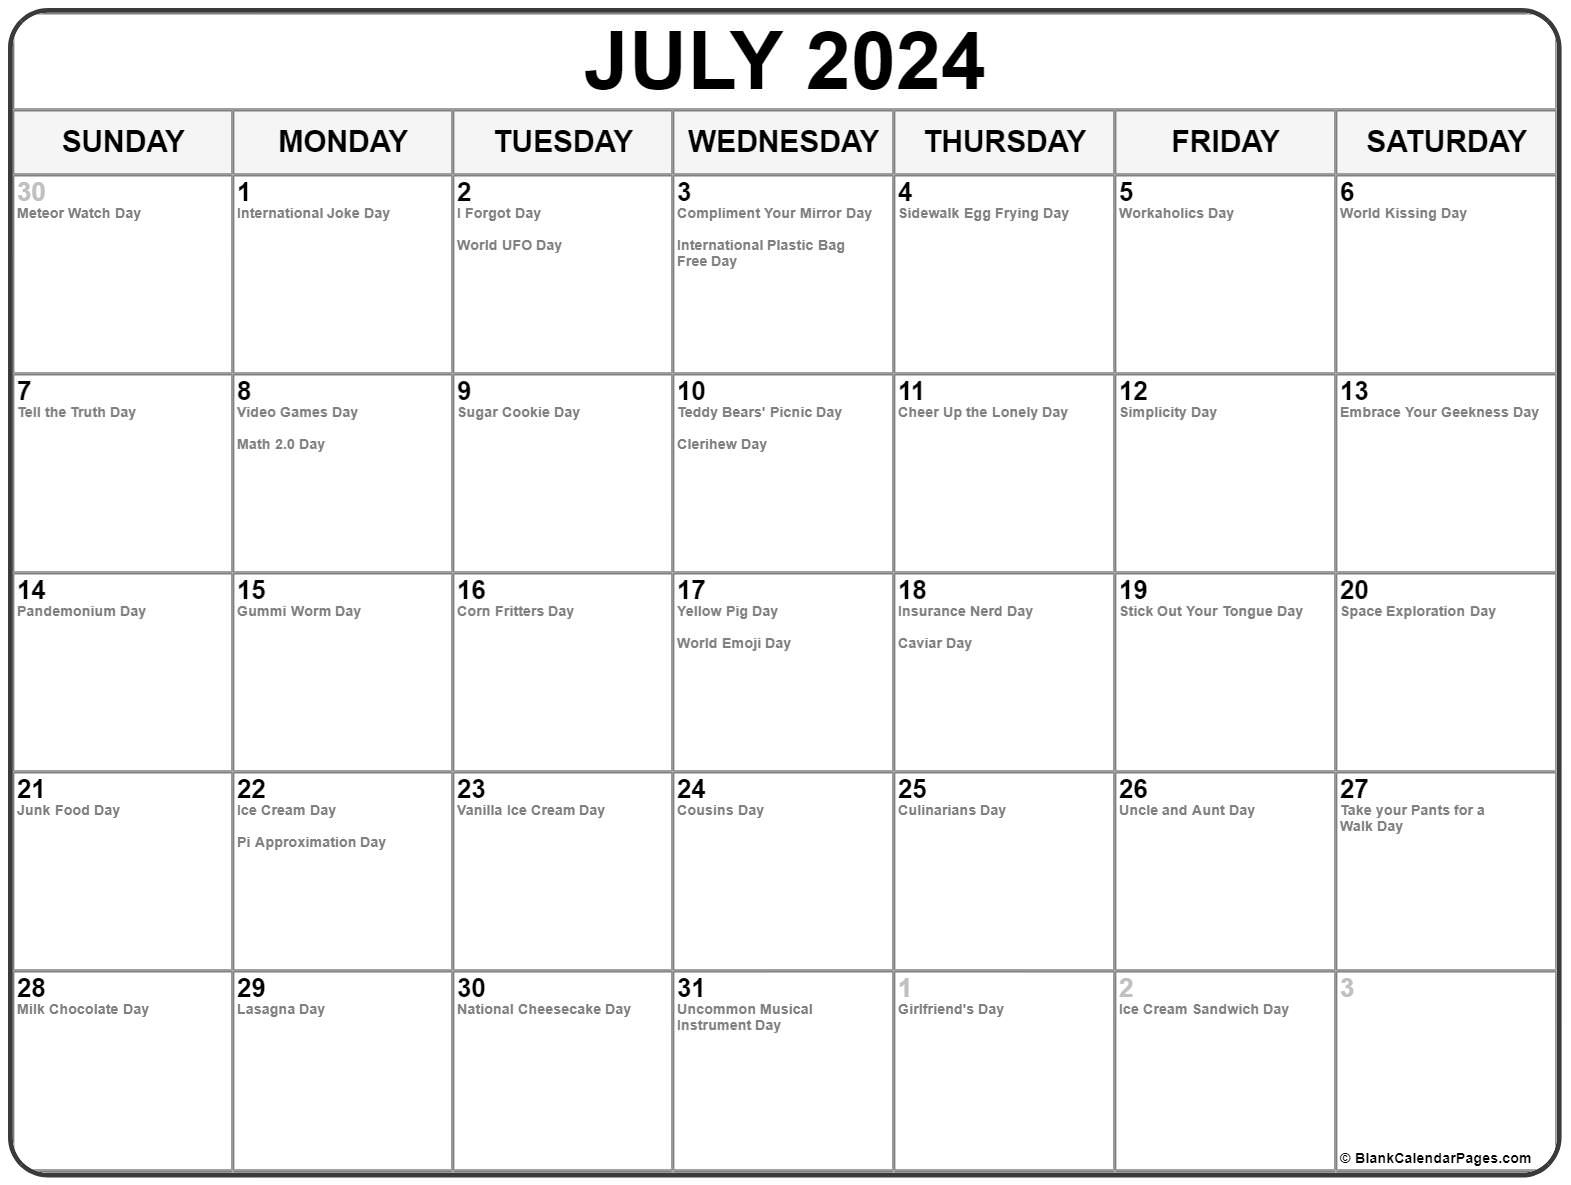 July 2024 With Holidays Calendar pertaining to July 28th Holiday Calendar 2024